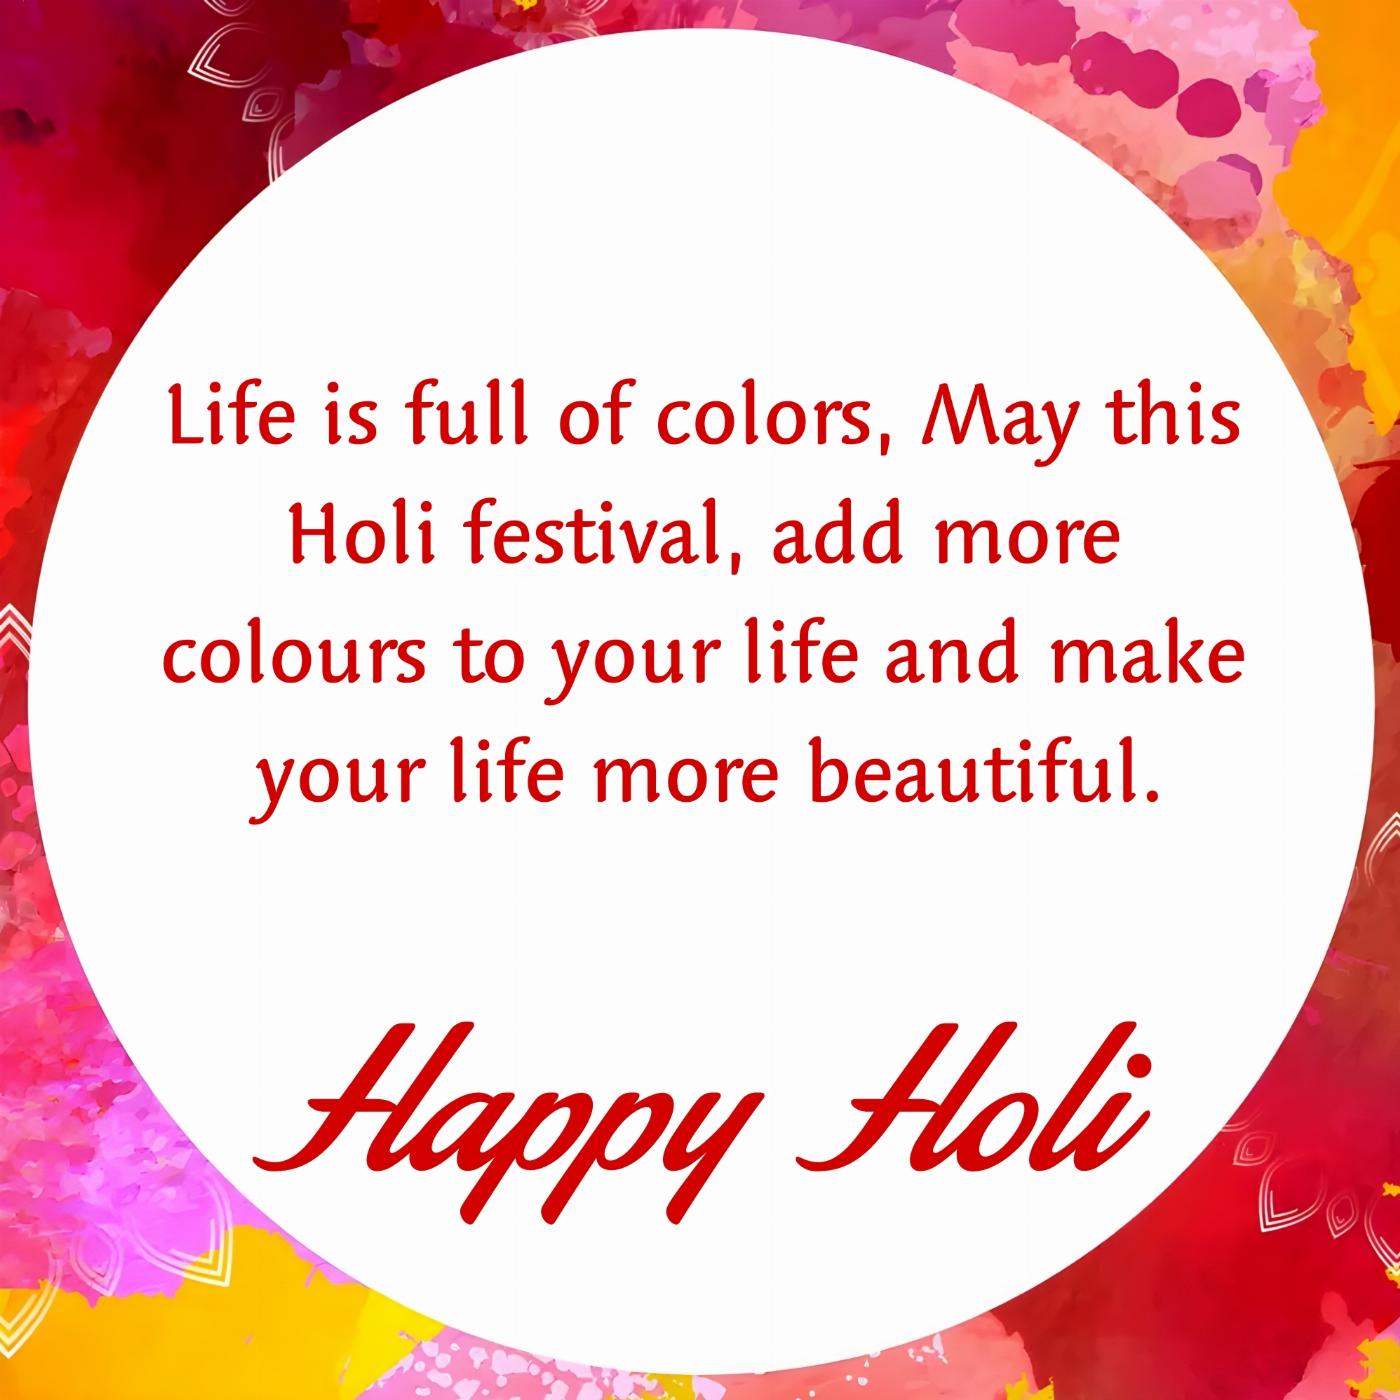 Life is full of colors May this Holi festival add more colours